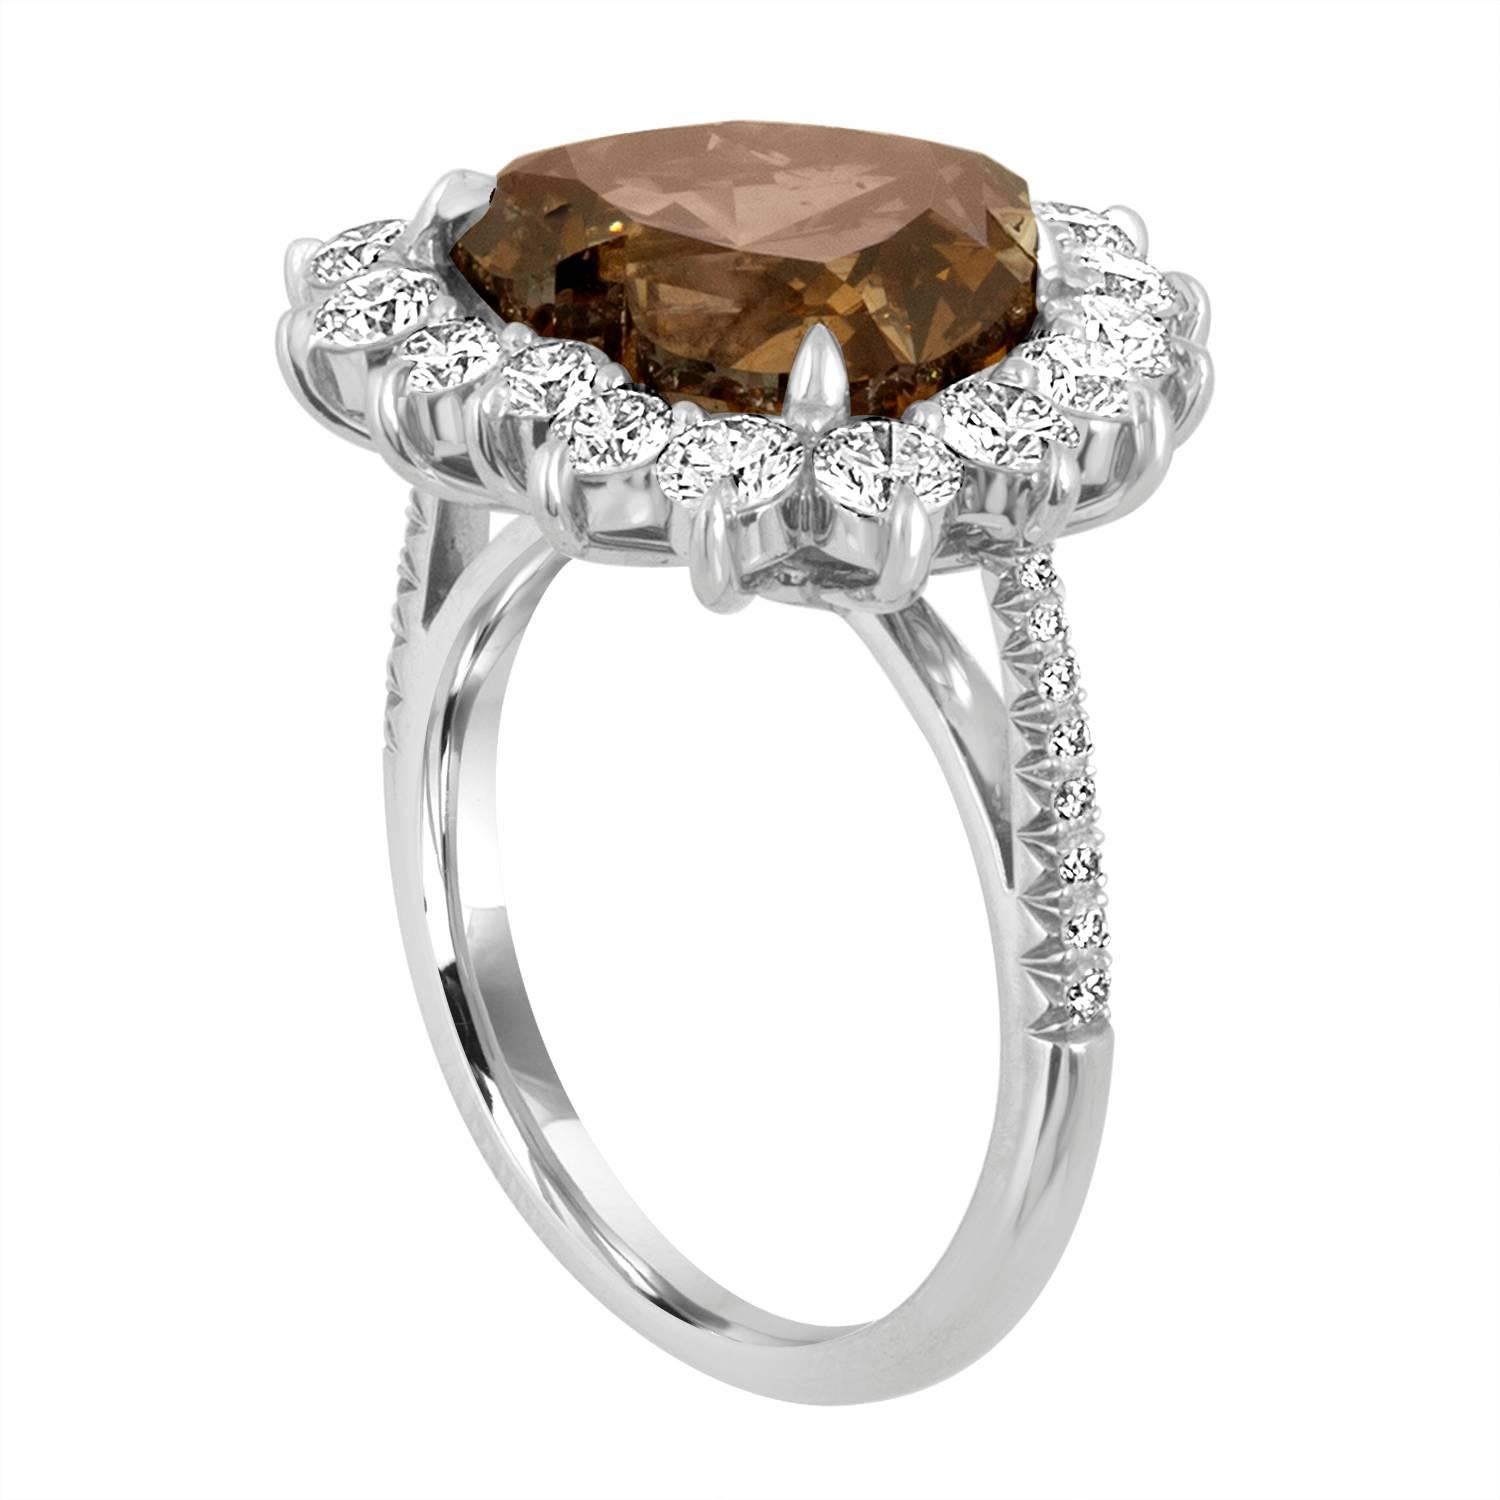 7.01 Carat Heart Shape Diamond, GIA Certified Fancy Dark Yellowish Brown is set in Platinum Ring mounting. The mounting is Hand Made One.
There are 16 Brilliants surrounding the Heart Shape in the Center. There are also 16 Round Brilliants on each